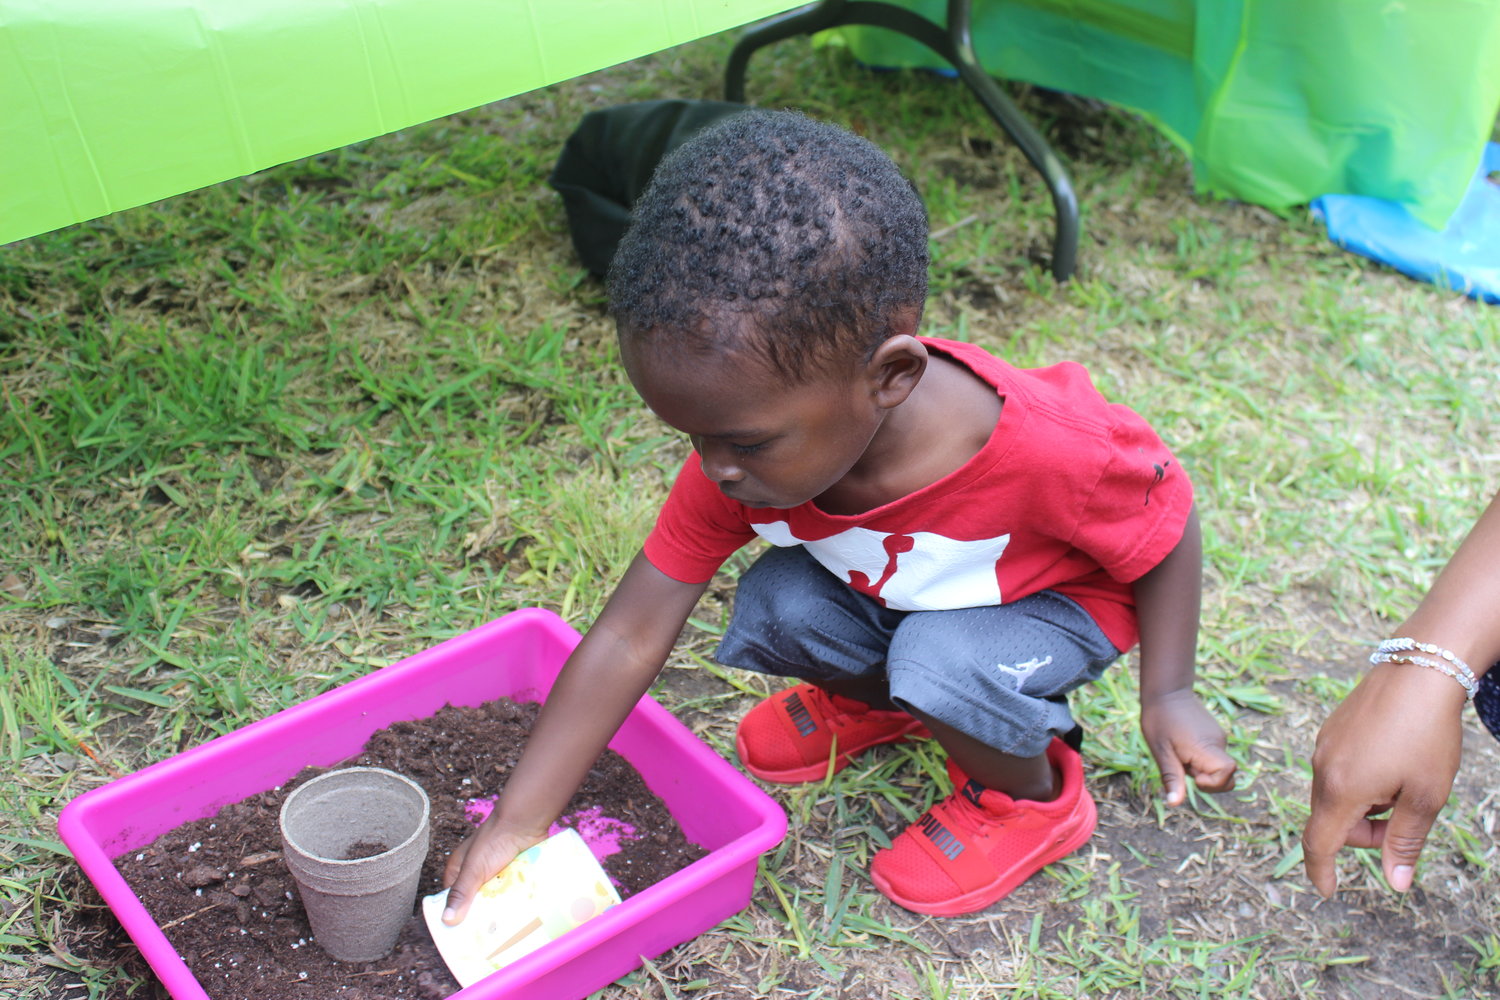 Jeremiah Georges scoops up some soil to plant seeds in a cup.